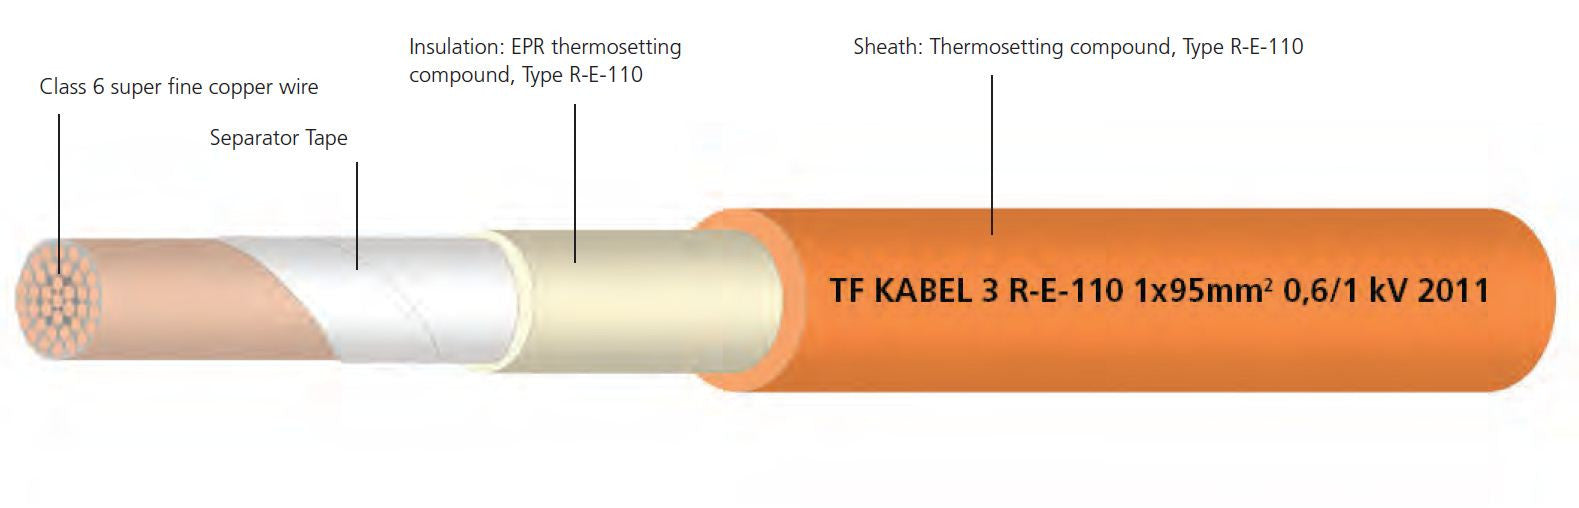 TFKable TF Kabel R-E-110 Rubber SDI Cable - BNR Industrial